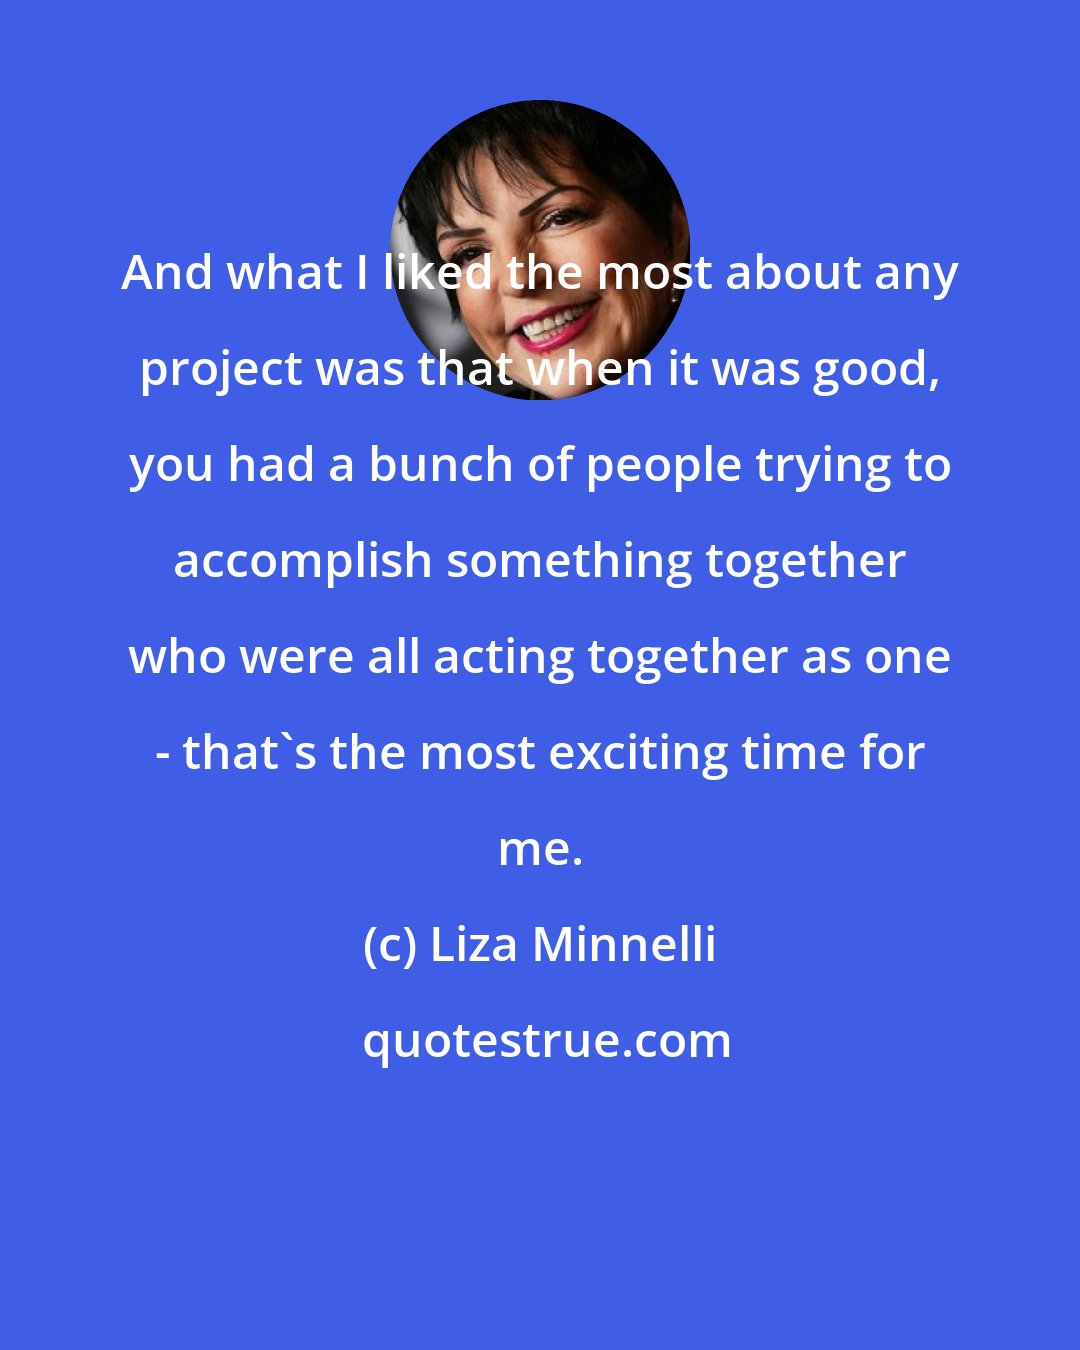 Liza Minnelli: And what I liked the most about any project was that when it was good, you had a bunch of people trying to accomplish something together who were all acting together as one - that's the most exciting time for me.